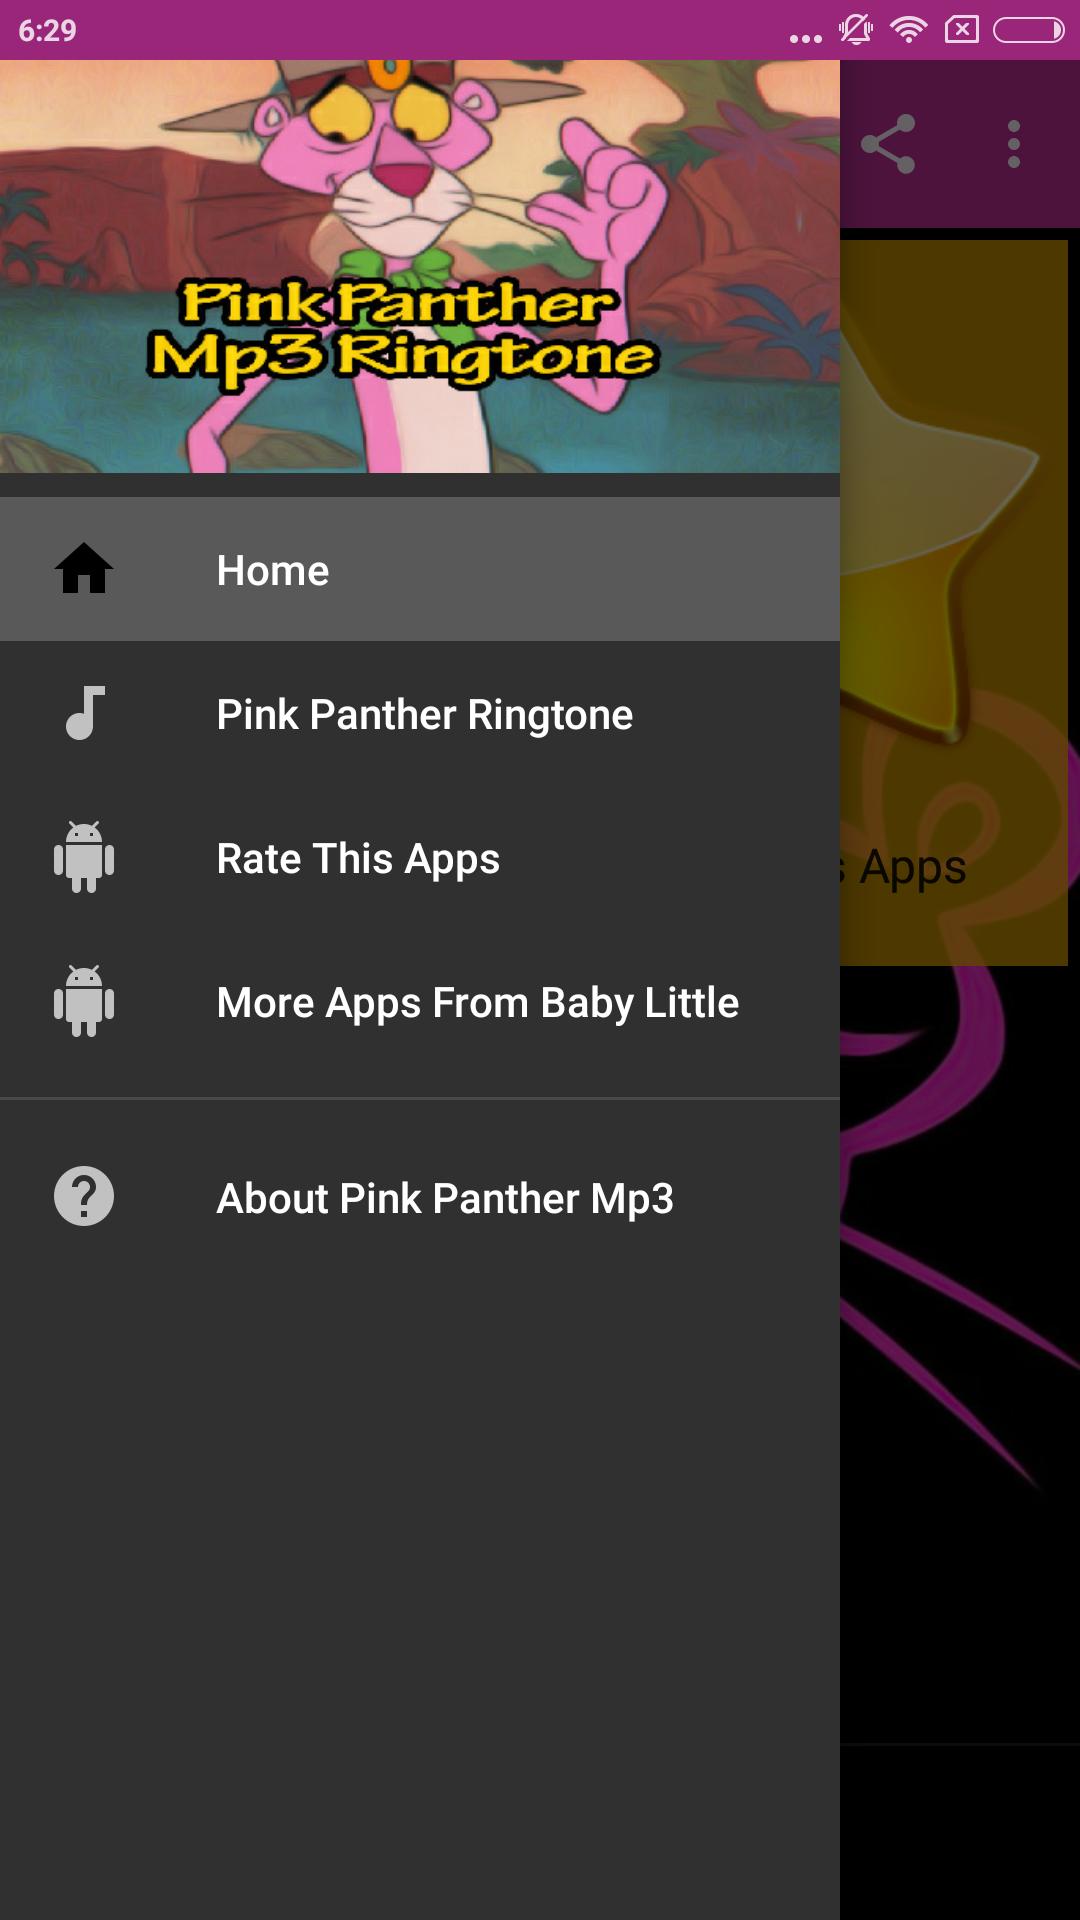 Pink Panther mp3 Ringtone for Android - APK Download